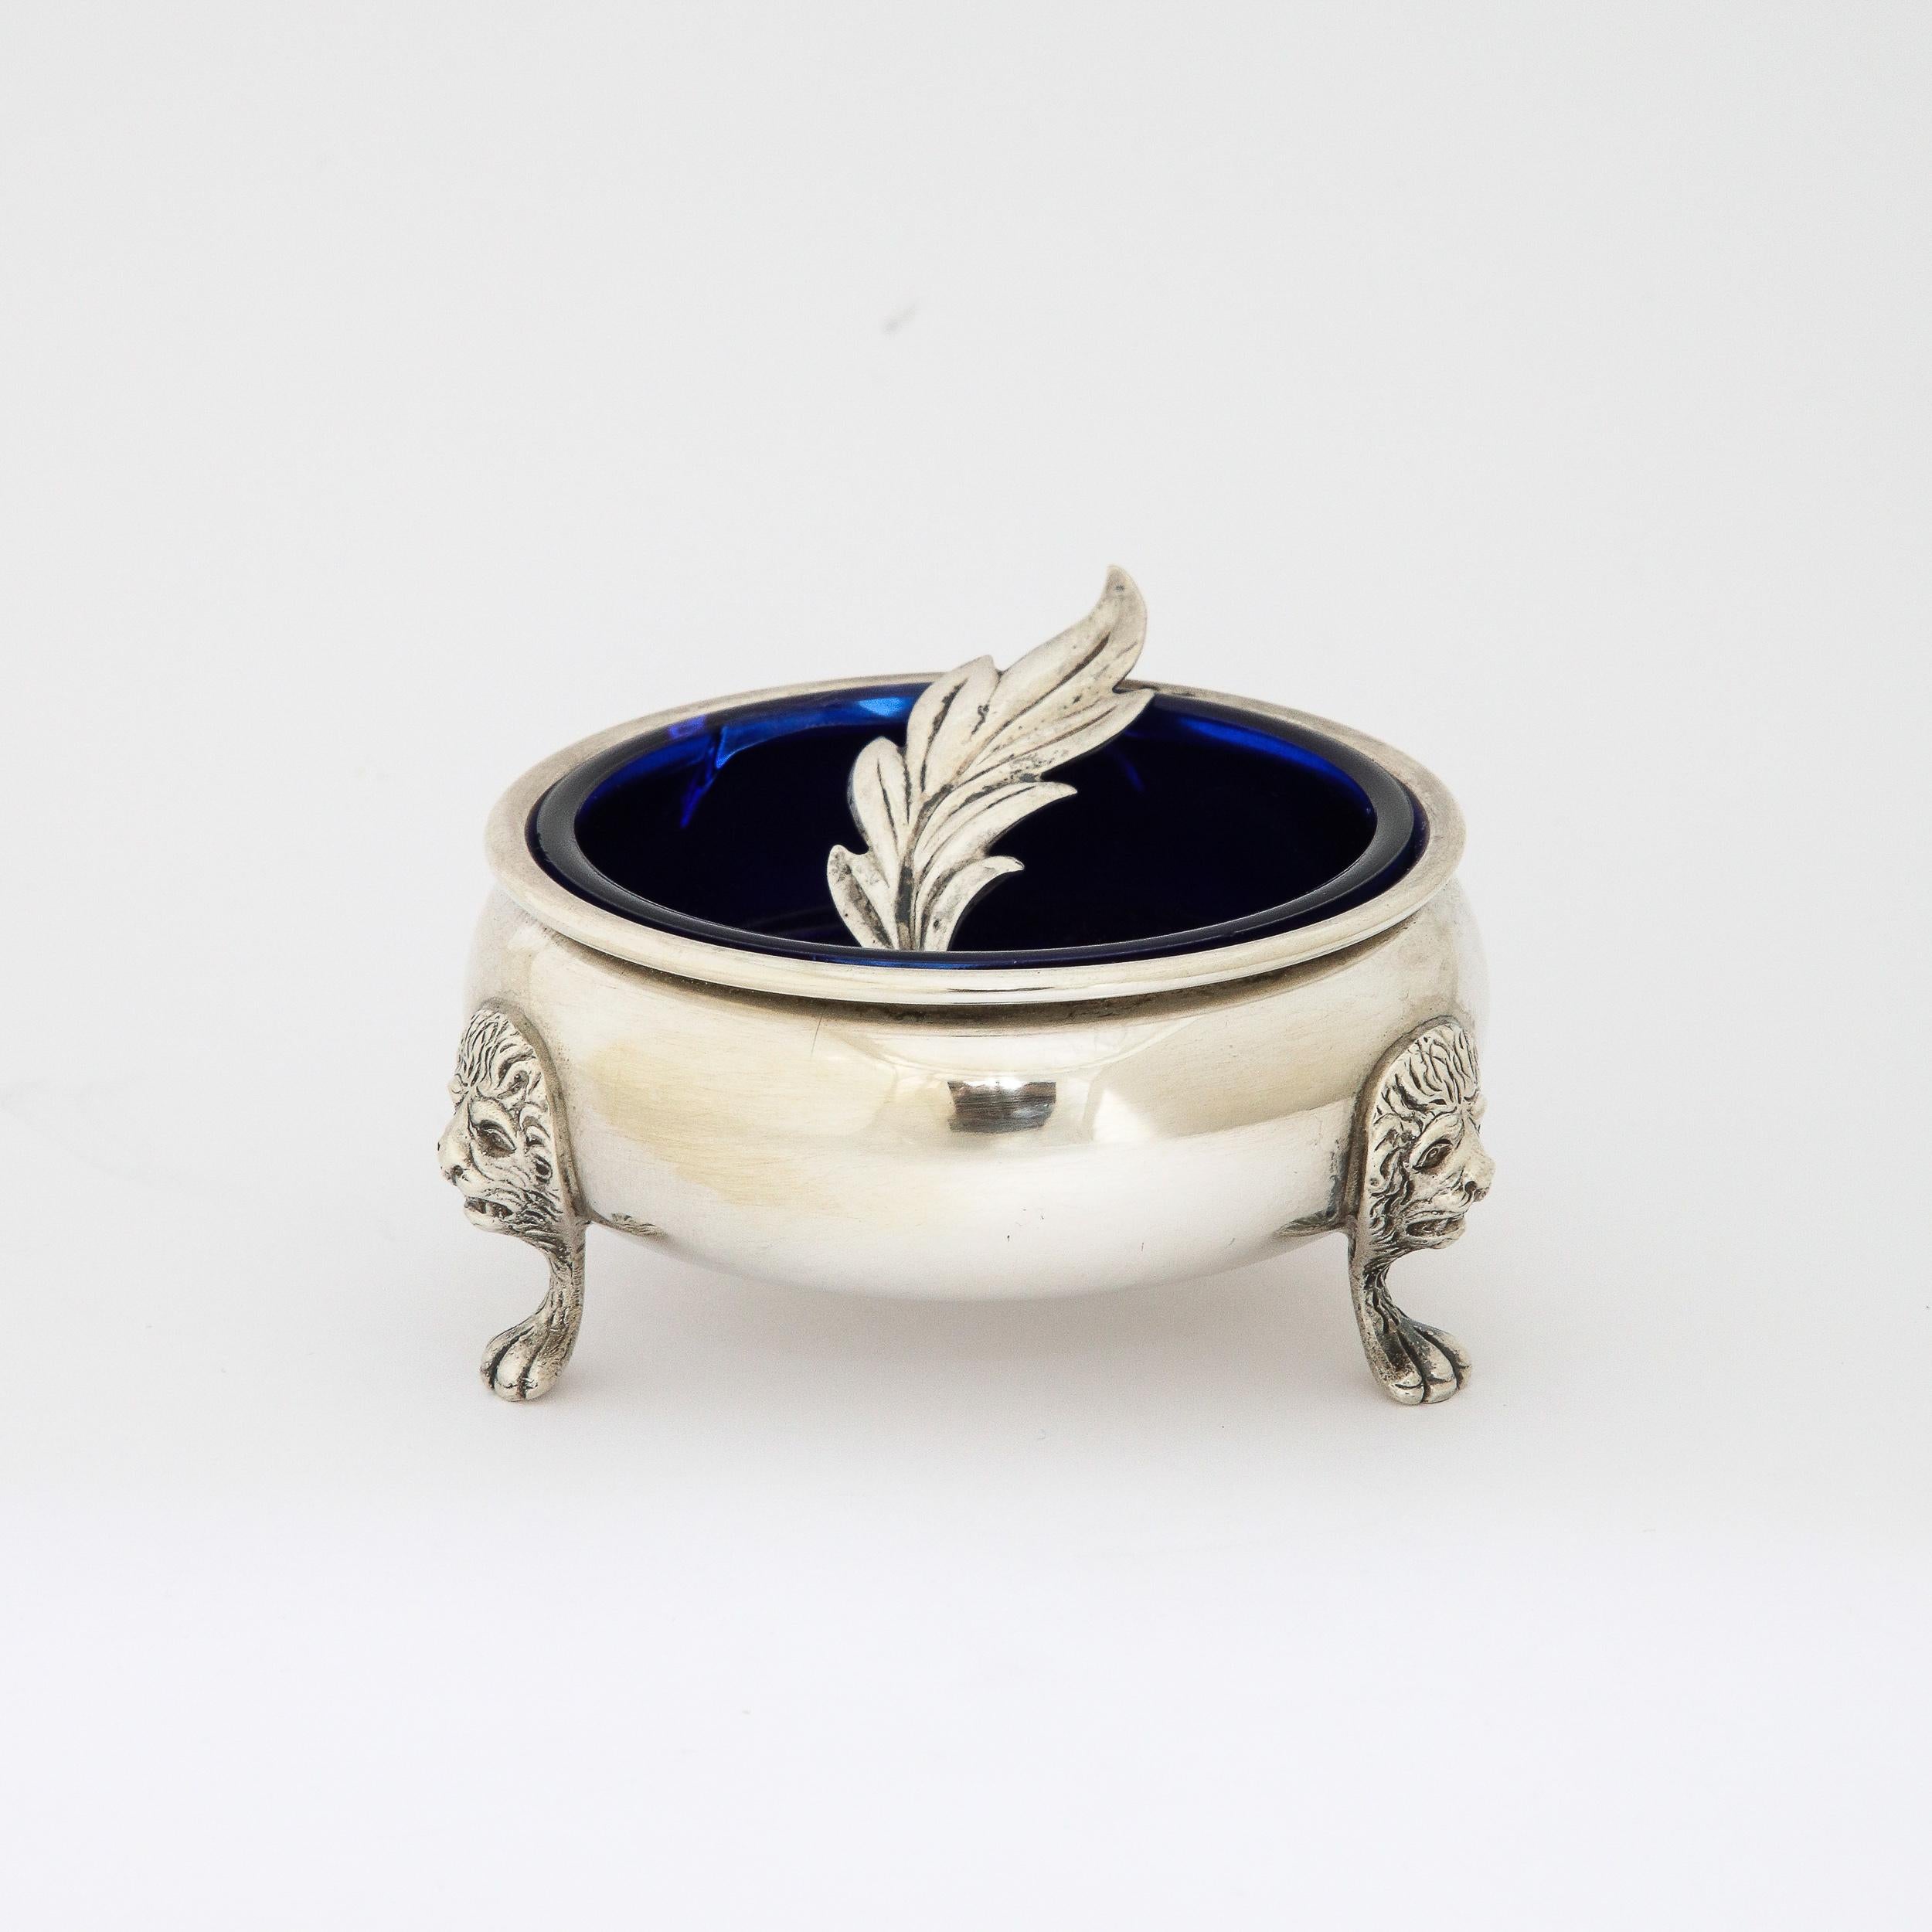 American Elegant Sterling Silver Salt Cellar by Aniston with Lion and Paw Feet